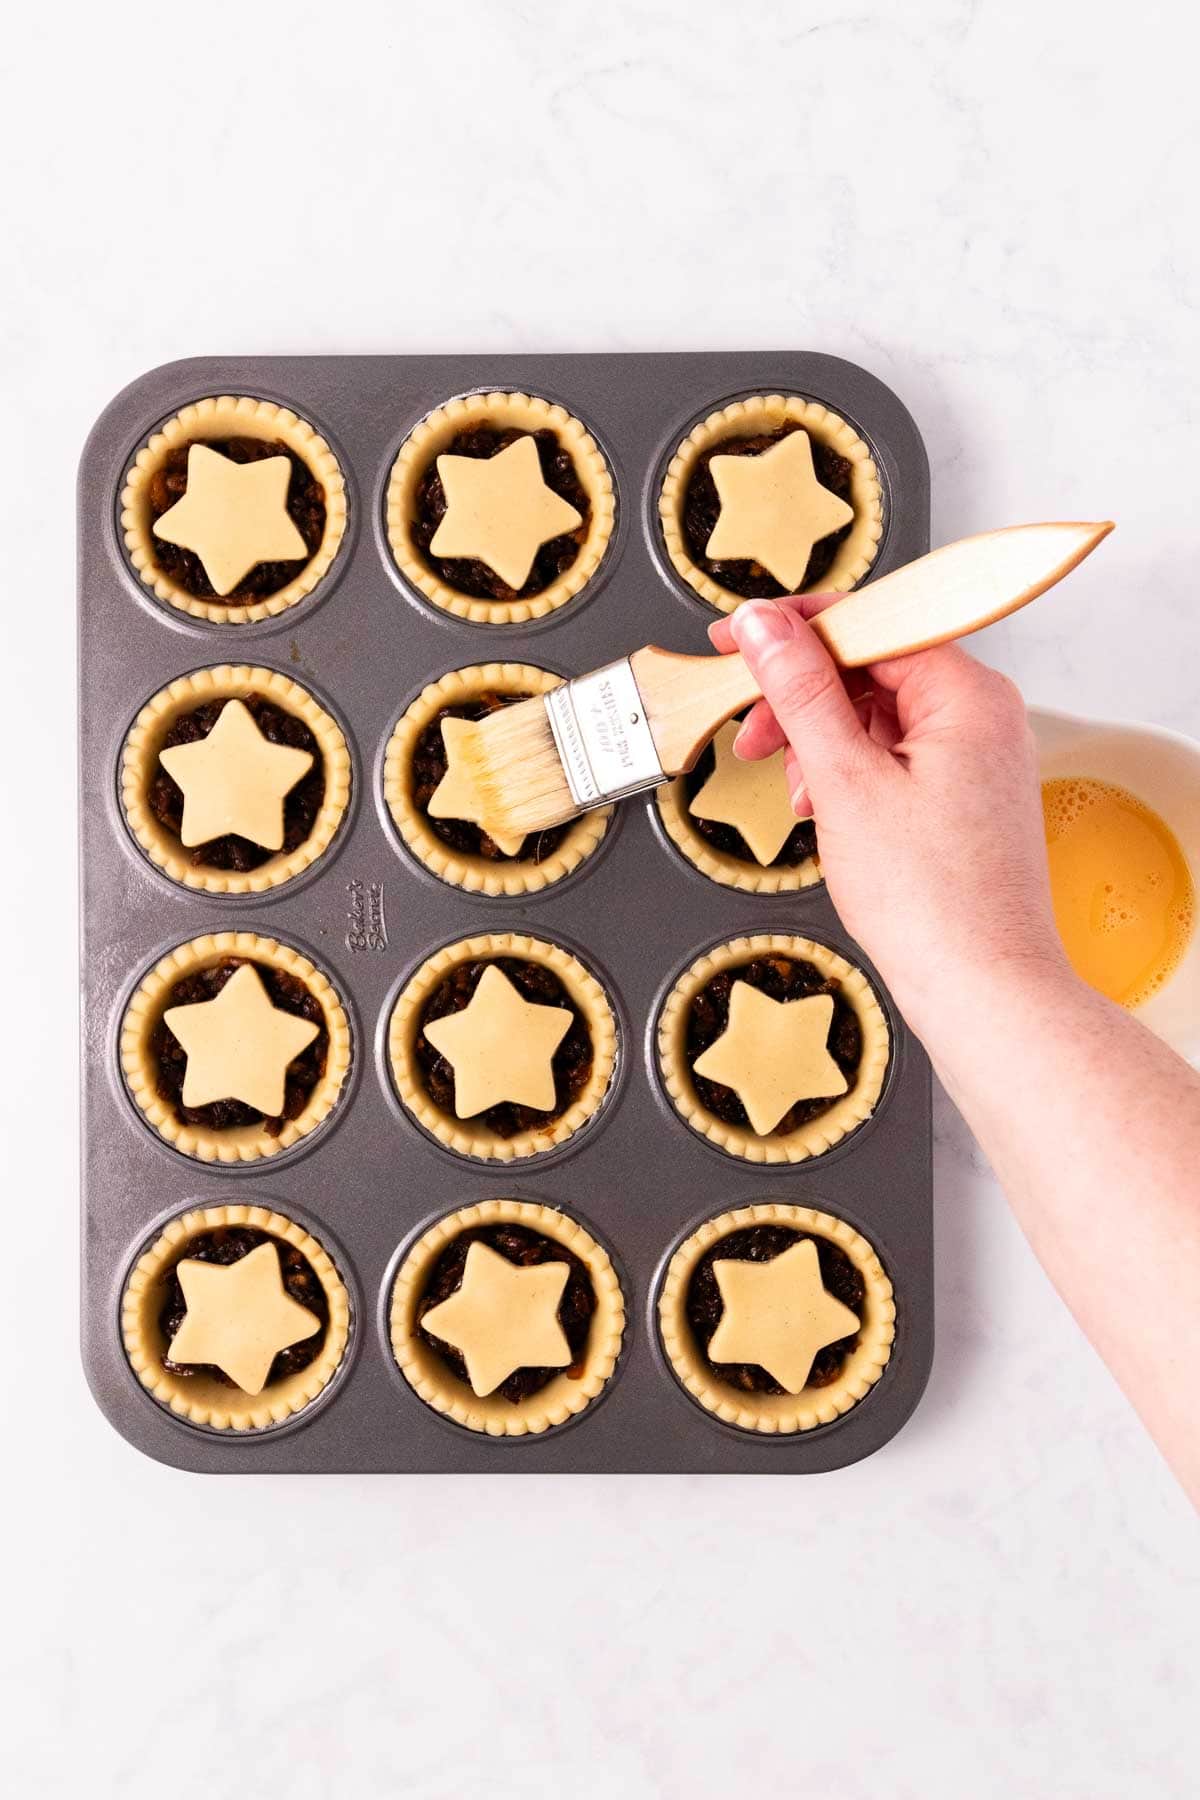 A hand holding a pastry brush, brushing an egg wash on the tops of the mince pies.